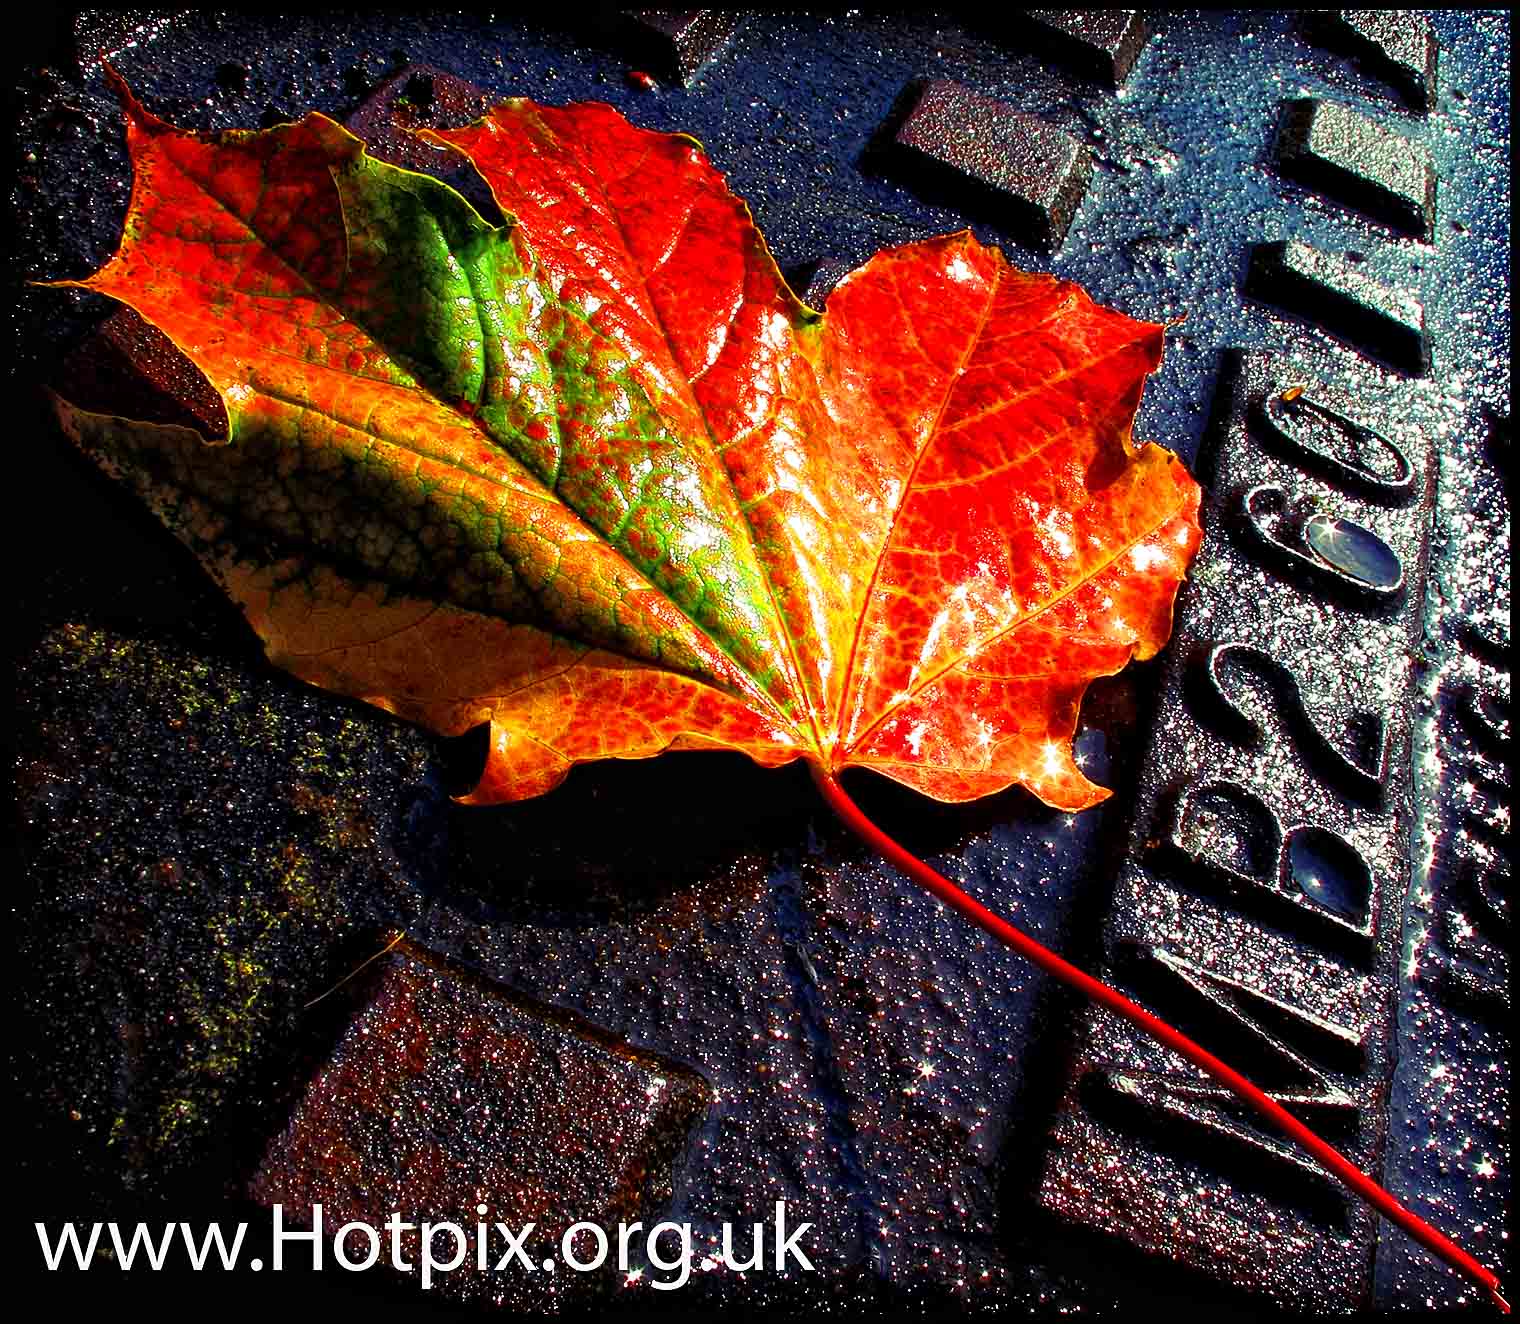 Leaf,leaves,autumn,fall,grid,metal,steel,iron,red,orange,sun,bright,tony,smith,hotpix,tonysmith,tonysmithhotpix,UK,England,HDR,sunlight,shower,showers,wet,soaked,water,drizzle,rust,BRAVO,autumn leaves,fall leaves,leafs